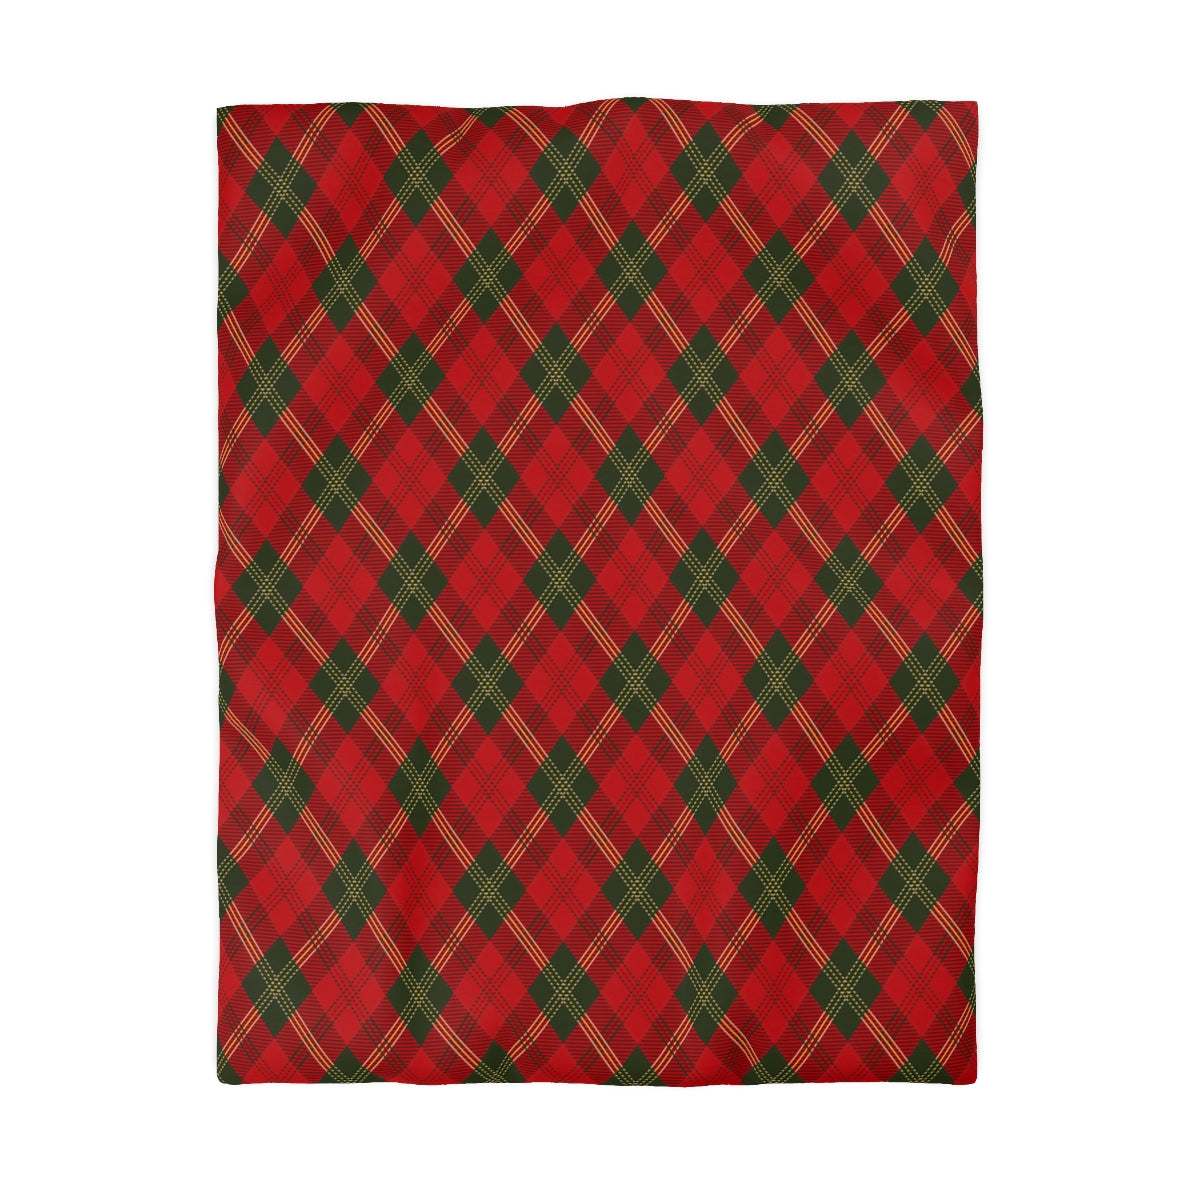 Red Green Plaid Duvet Cover, Tartan Check Bedding Queen King Full Twin XL Microfiber Designer Bed Quilt Bedroom Decor Starcove Fashion